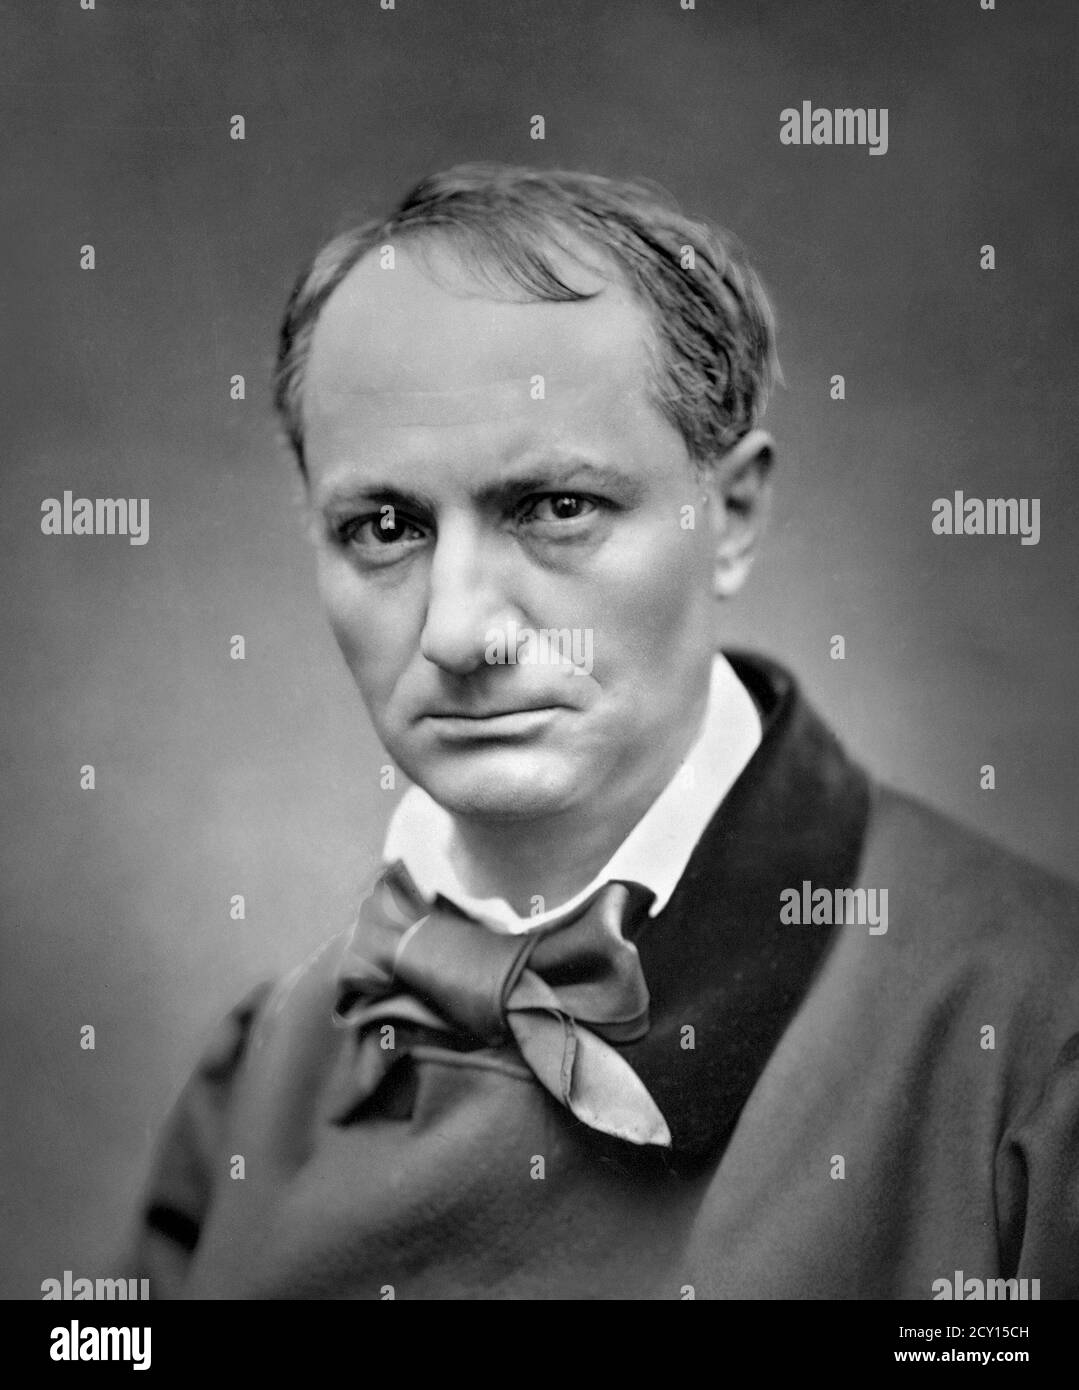 Charles Baudelaire. Portrait of the French poet, Charles Pierre Baudelaire (1821-1867) by Étienne Carjat, 1863 Stock Photo